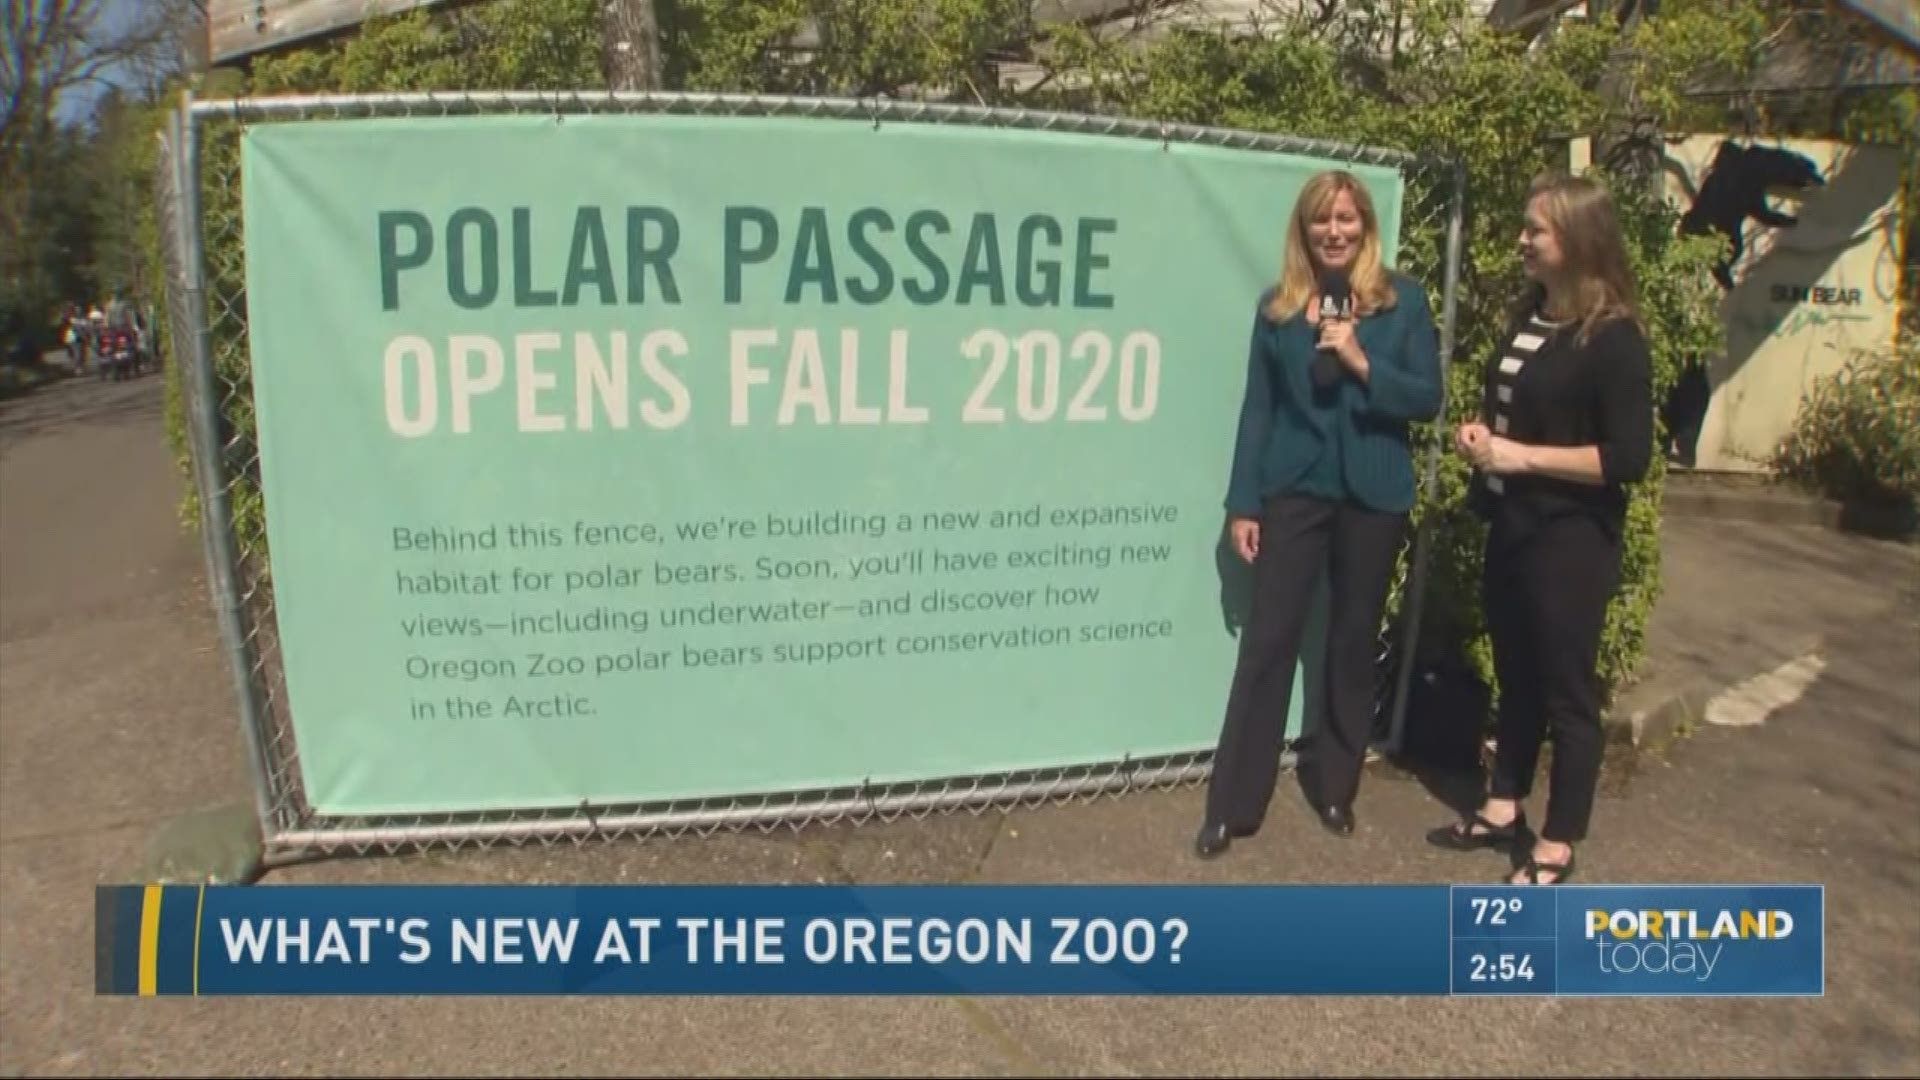 What's new at the Oregon Zoo